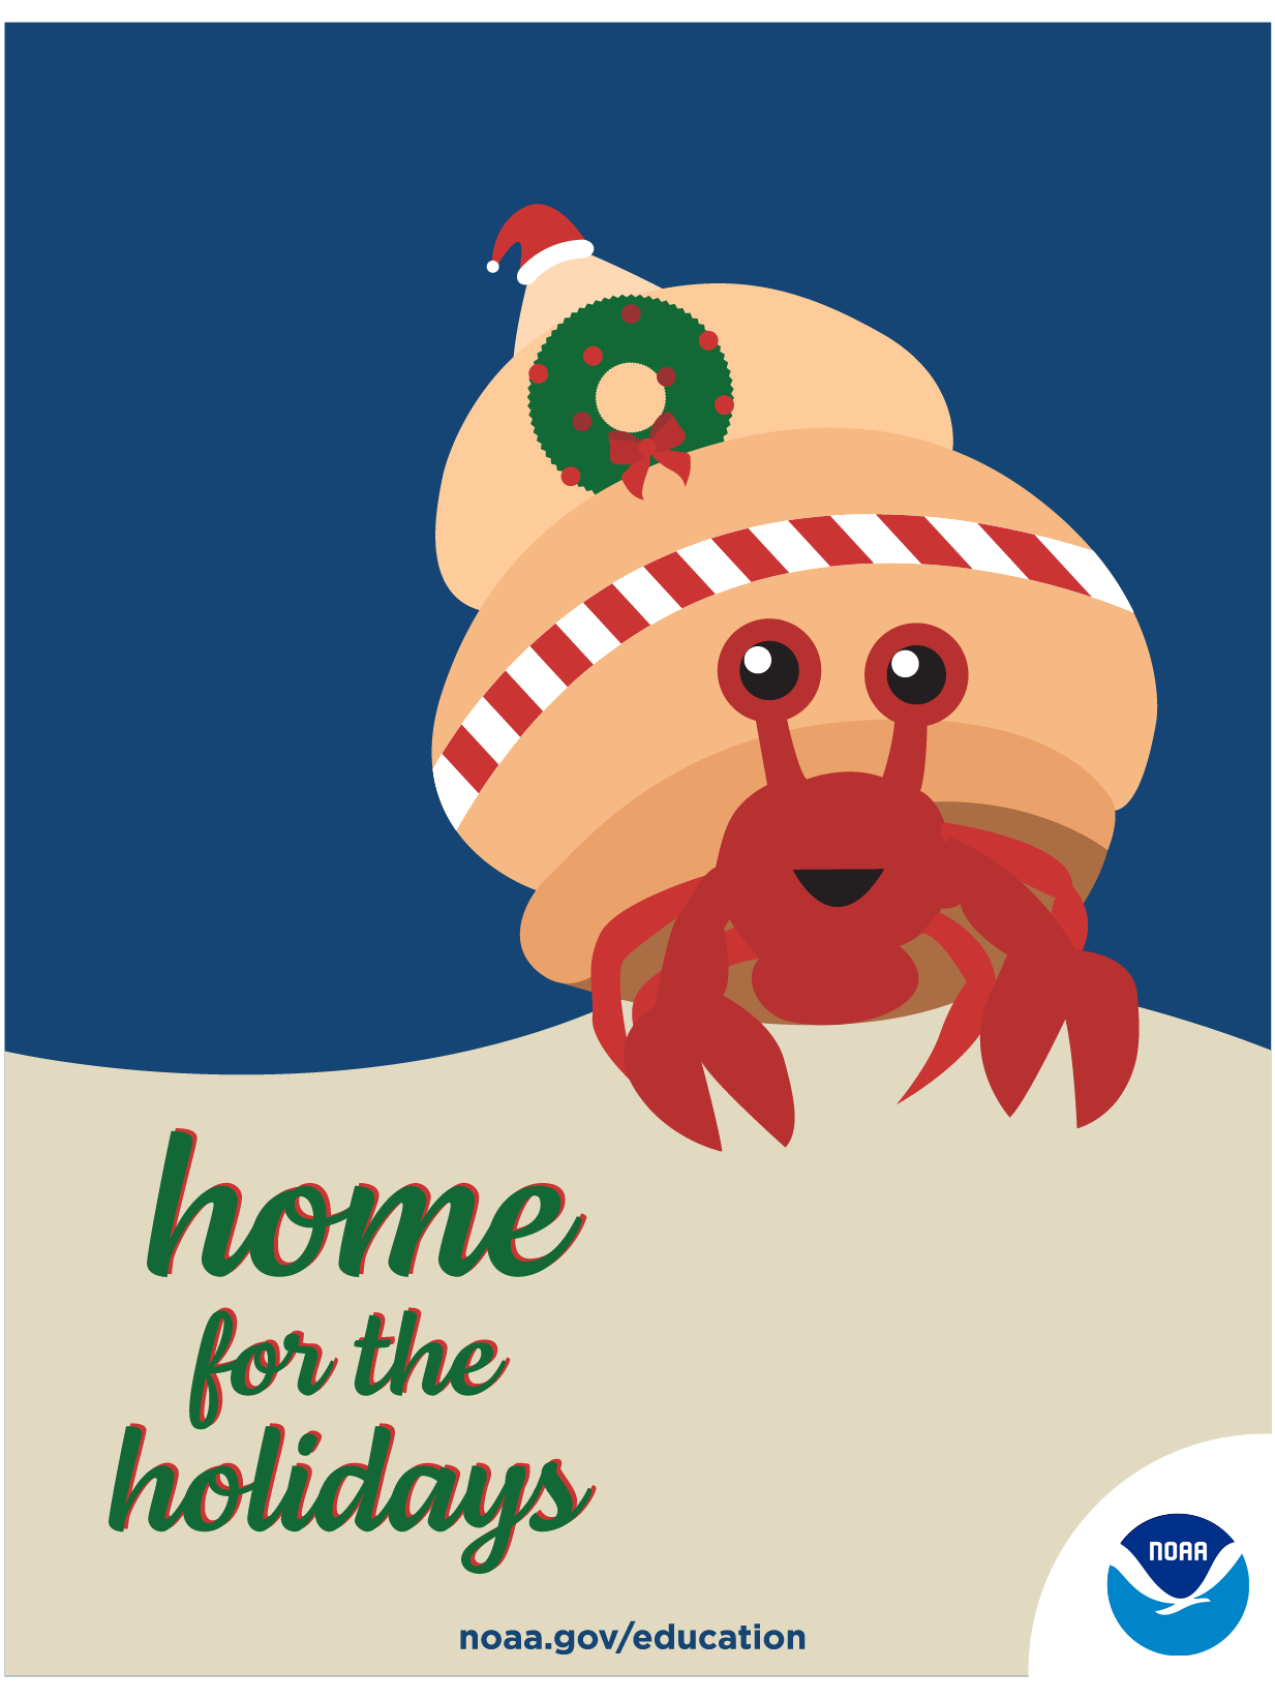 An illustrated holiday card featuring a hermit crab with a shell decorated for the holidays including a wreath, red and white striped ribbon, and a Santa hat on top. There is a NOAA logo in the corner of the card. Text: Home for the holidays! noaa.gov/education